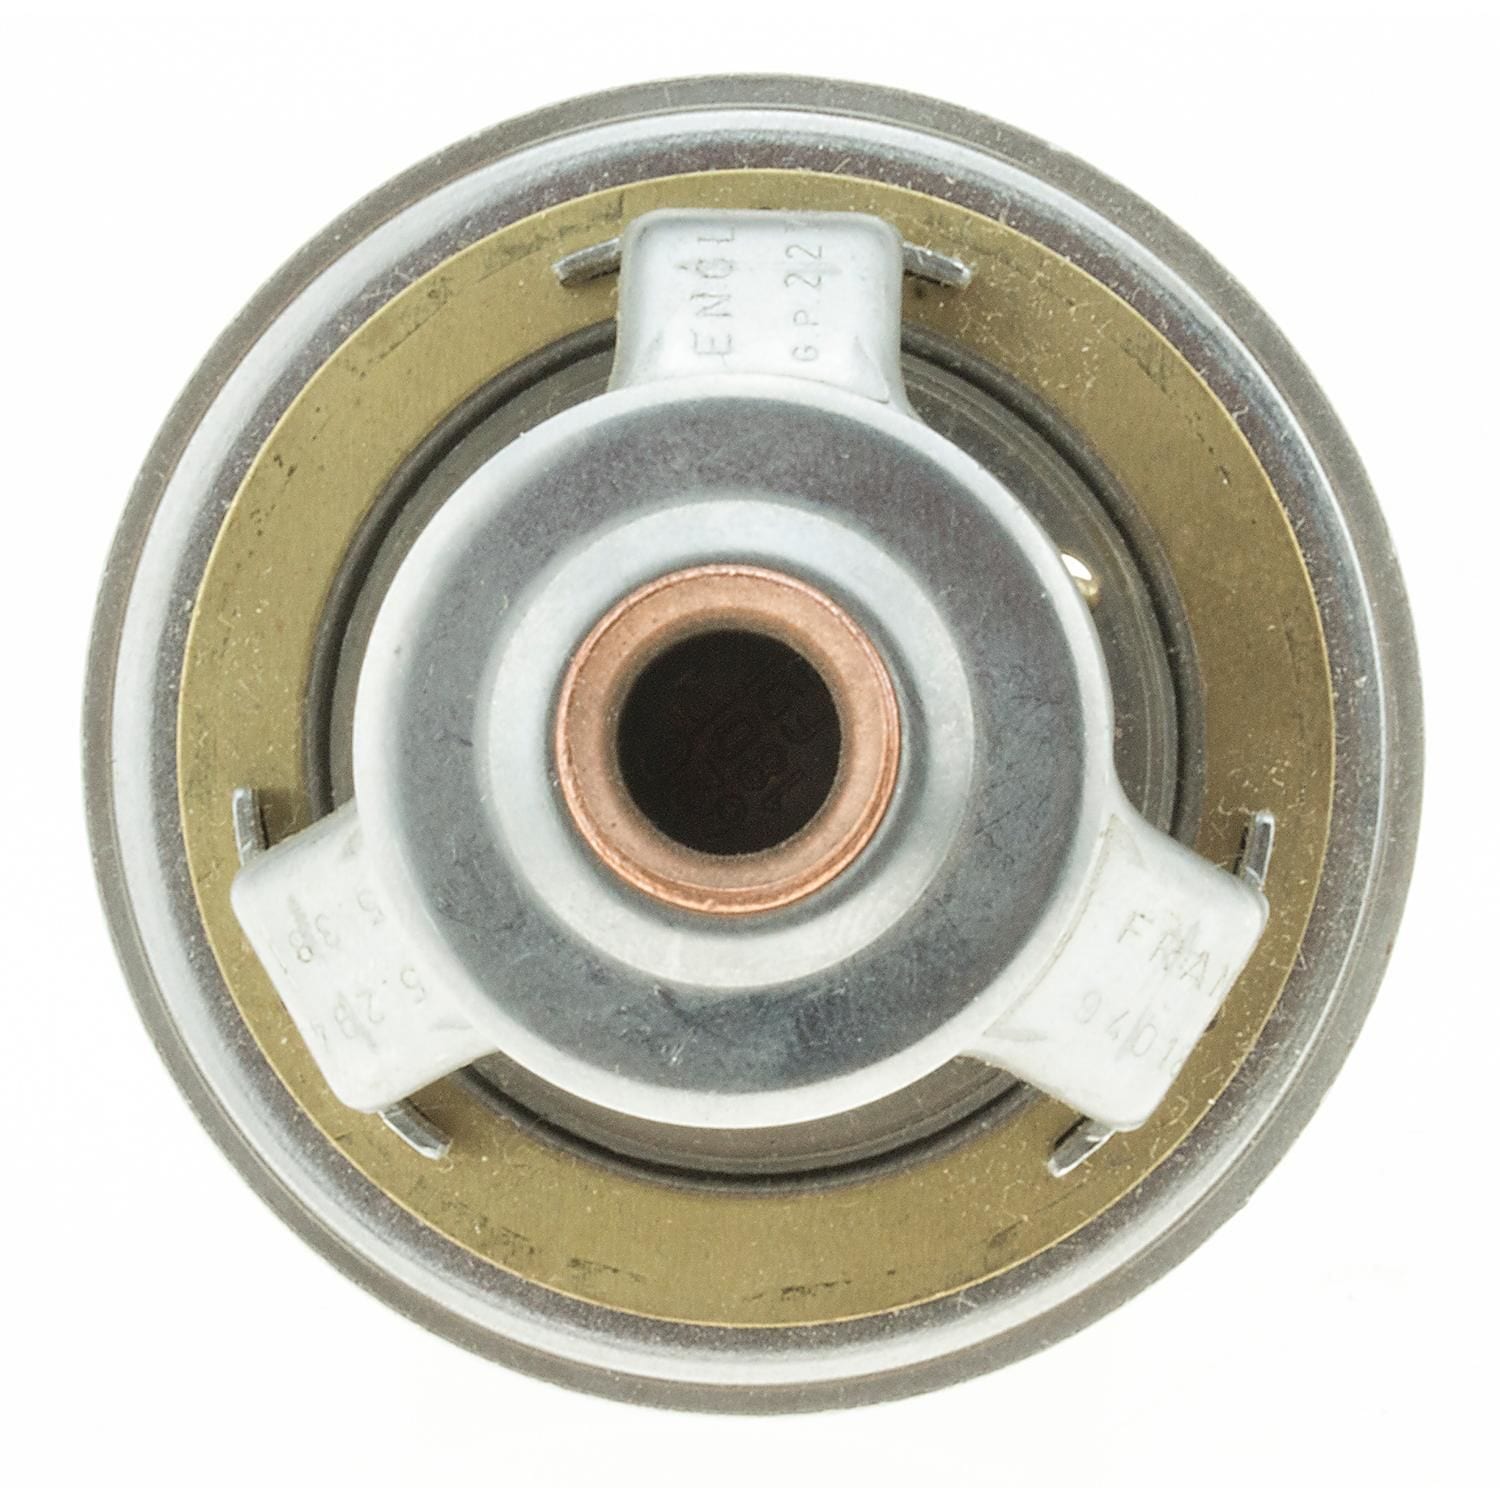 P/N: L017 - Thermostat for TF49/TF65/TF130